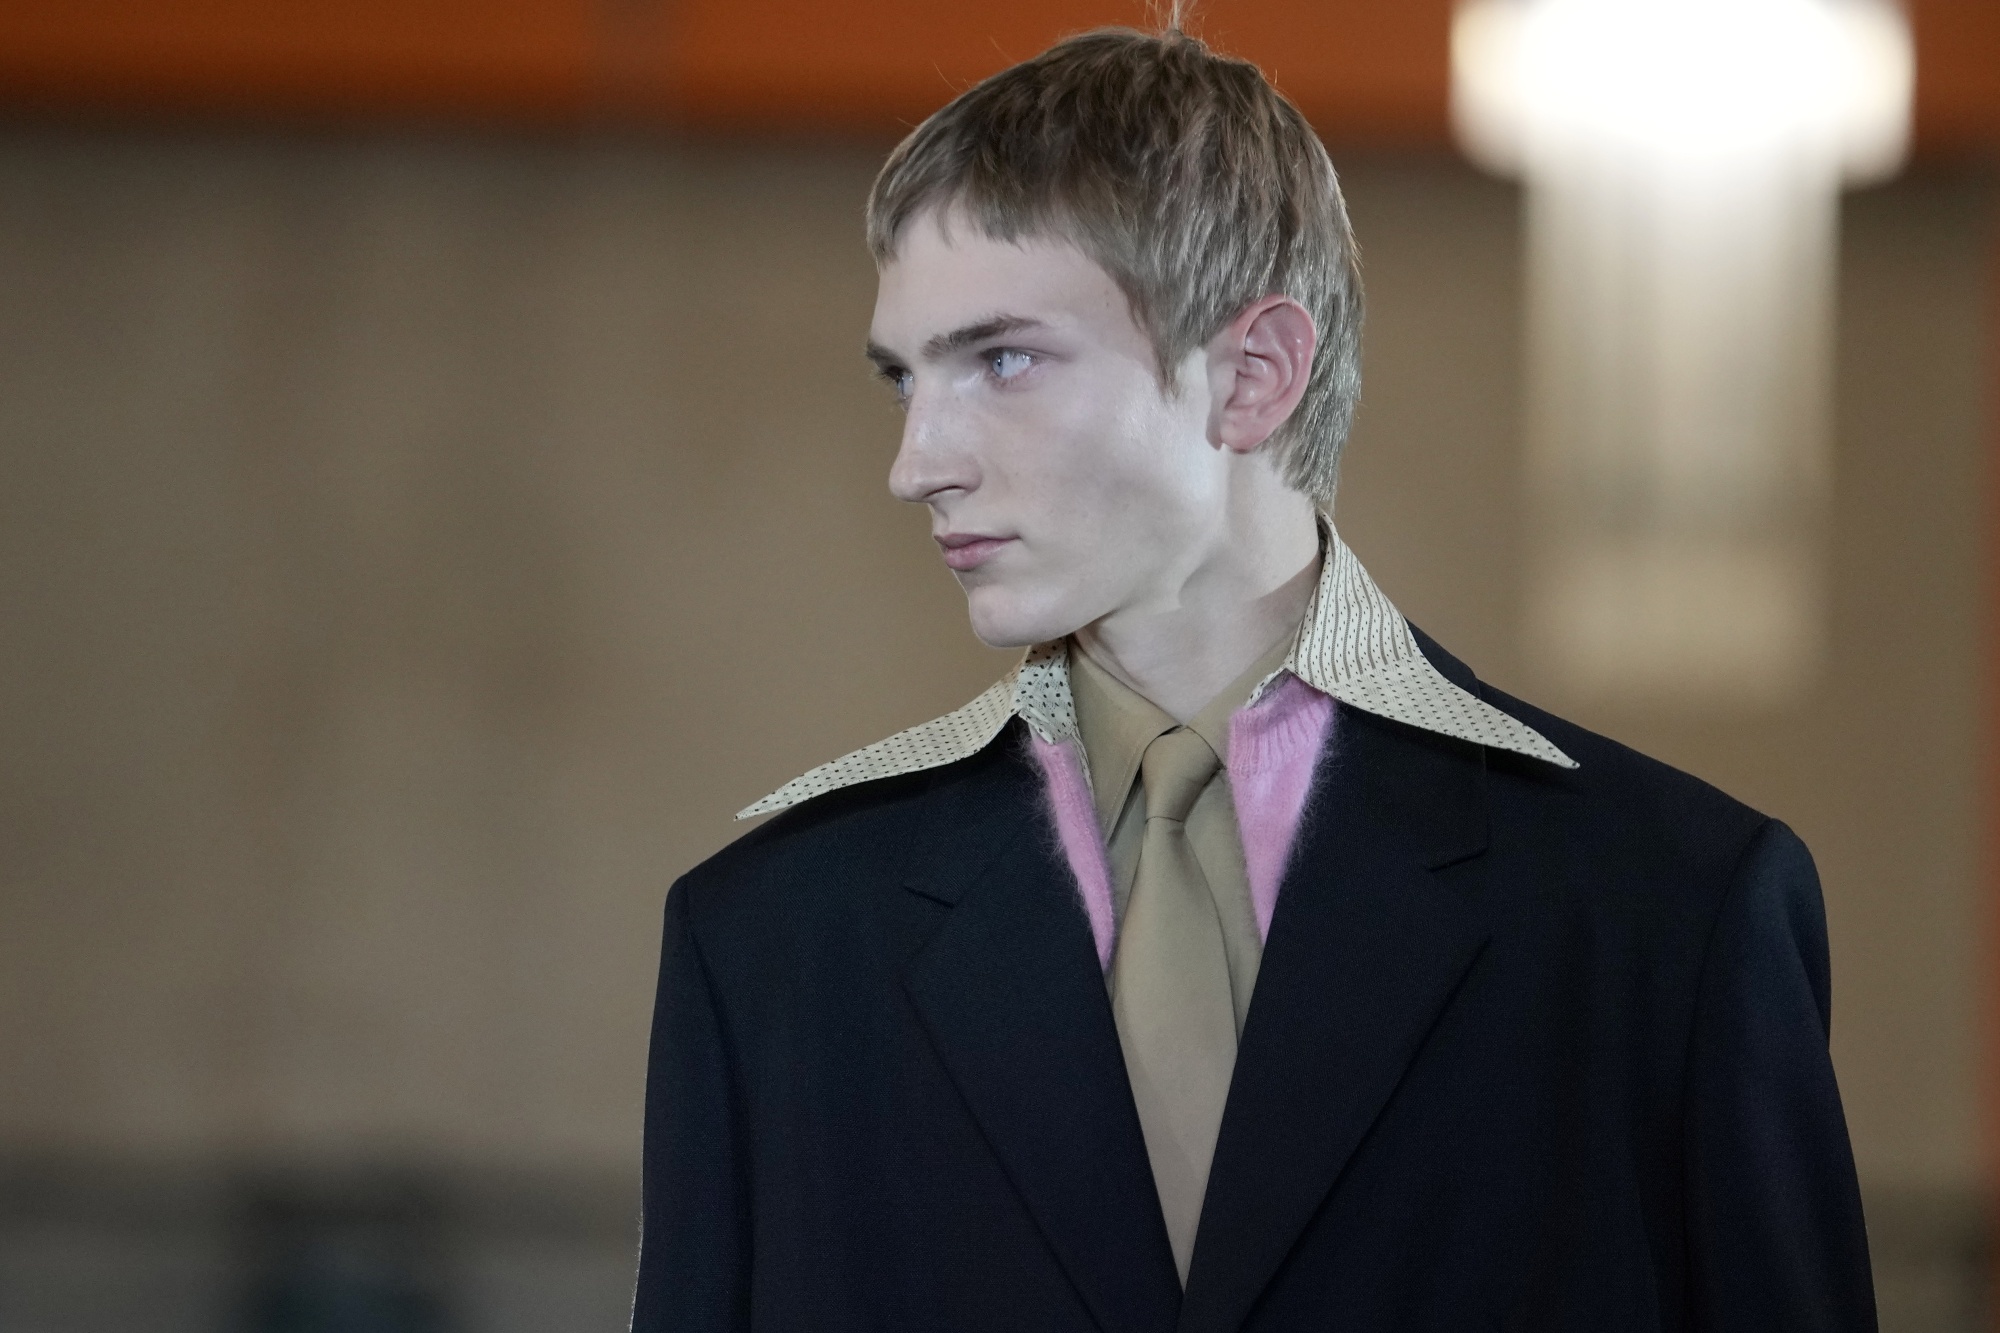 Taking Care” 🌷For Fall 2023, @prada reexamined the notion of uniform  dressing, offering beautifully crafted clothes that blur the